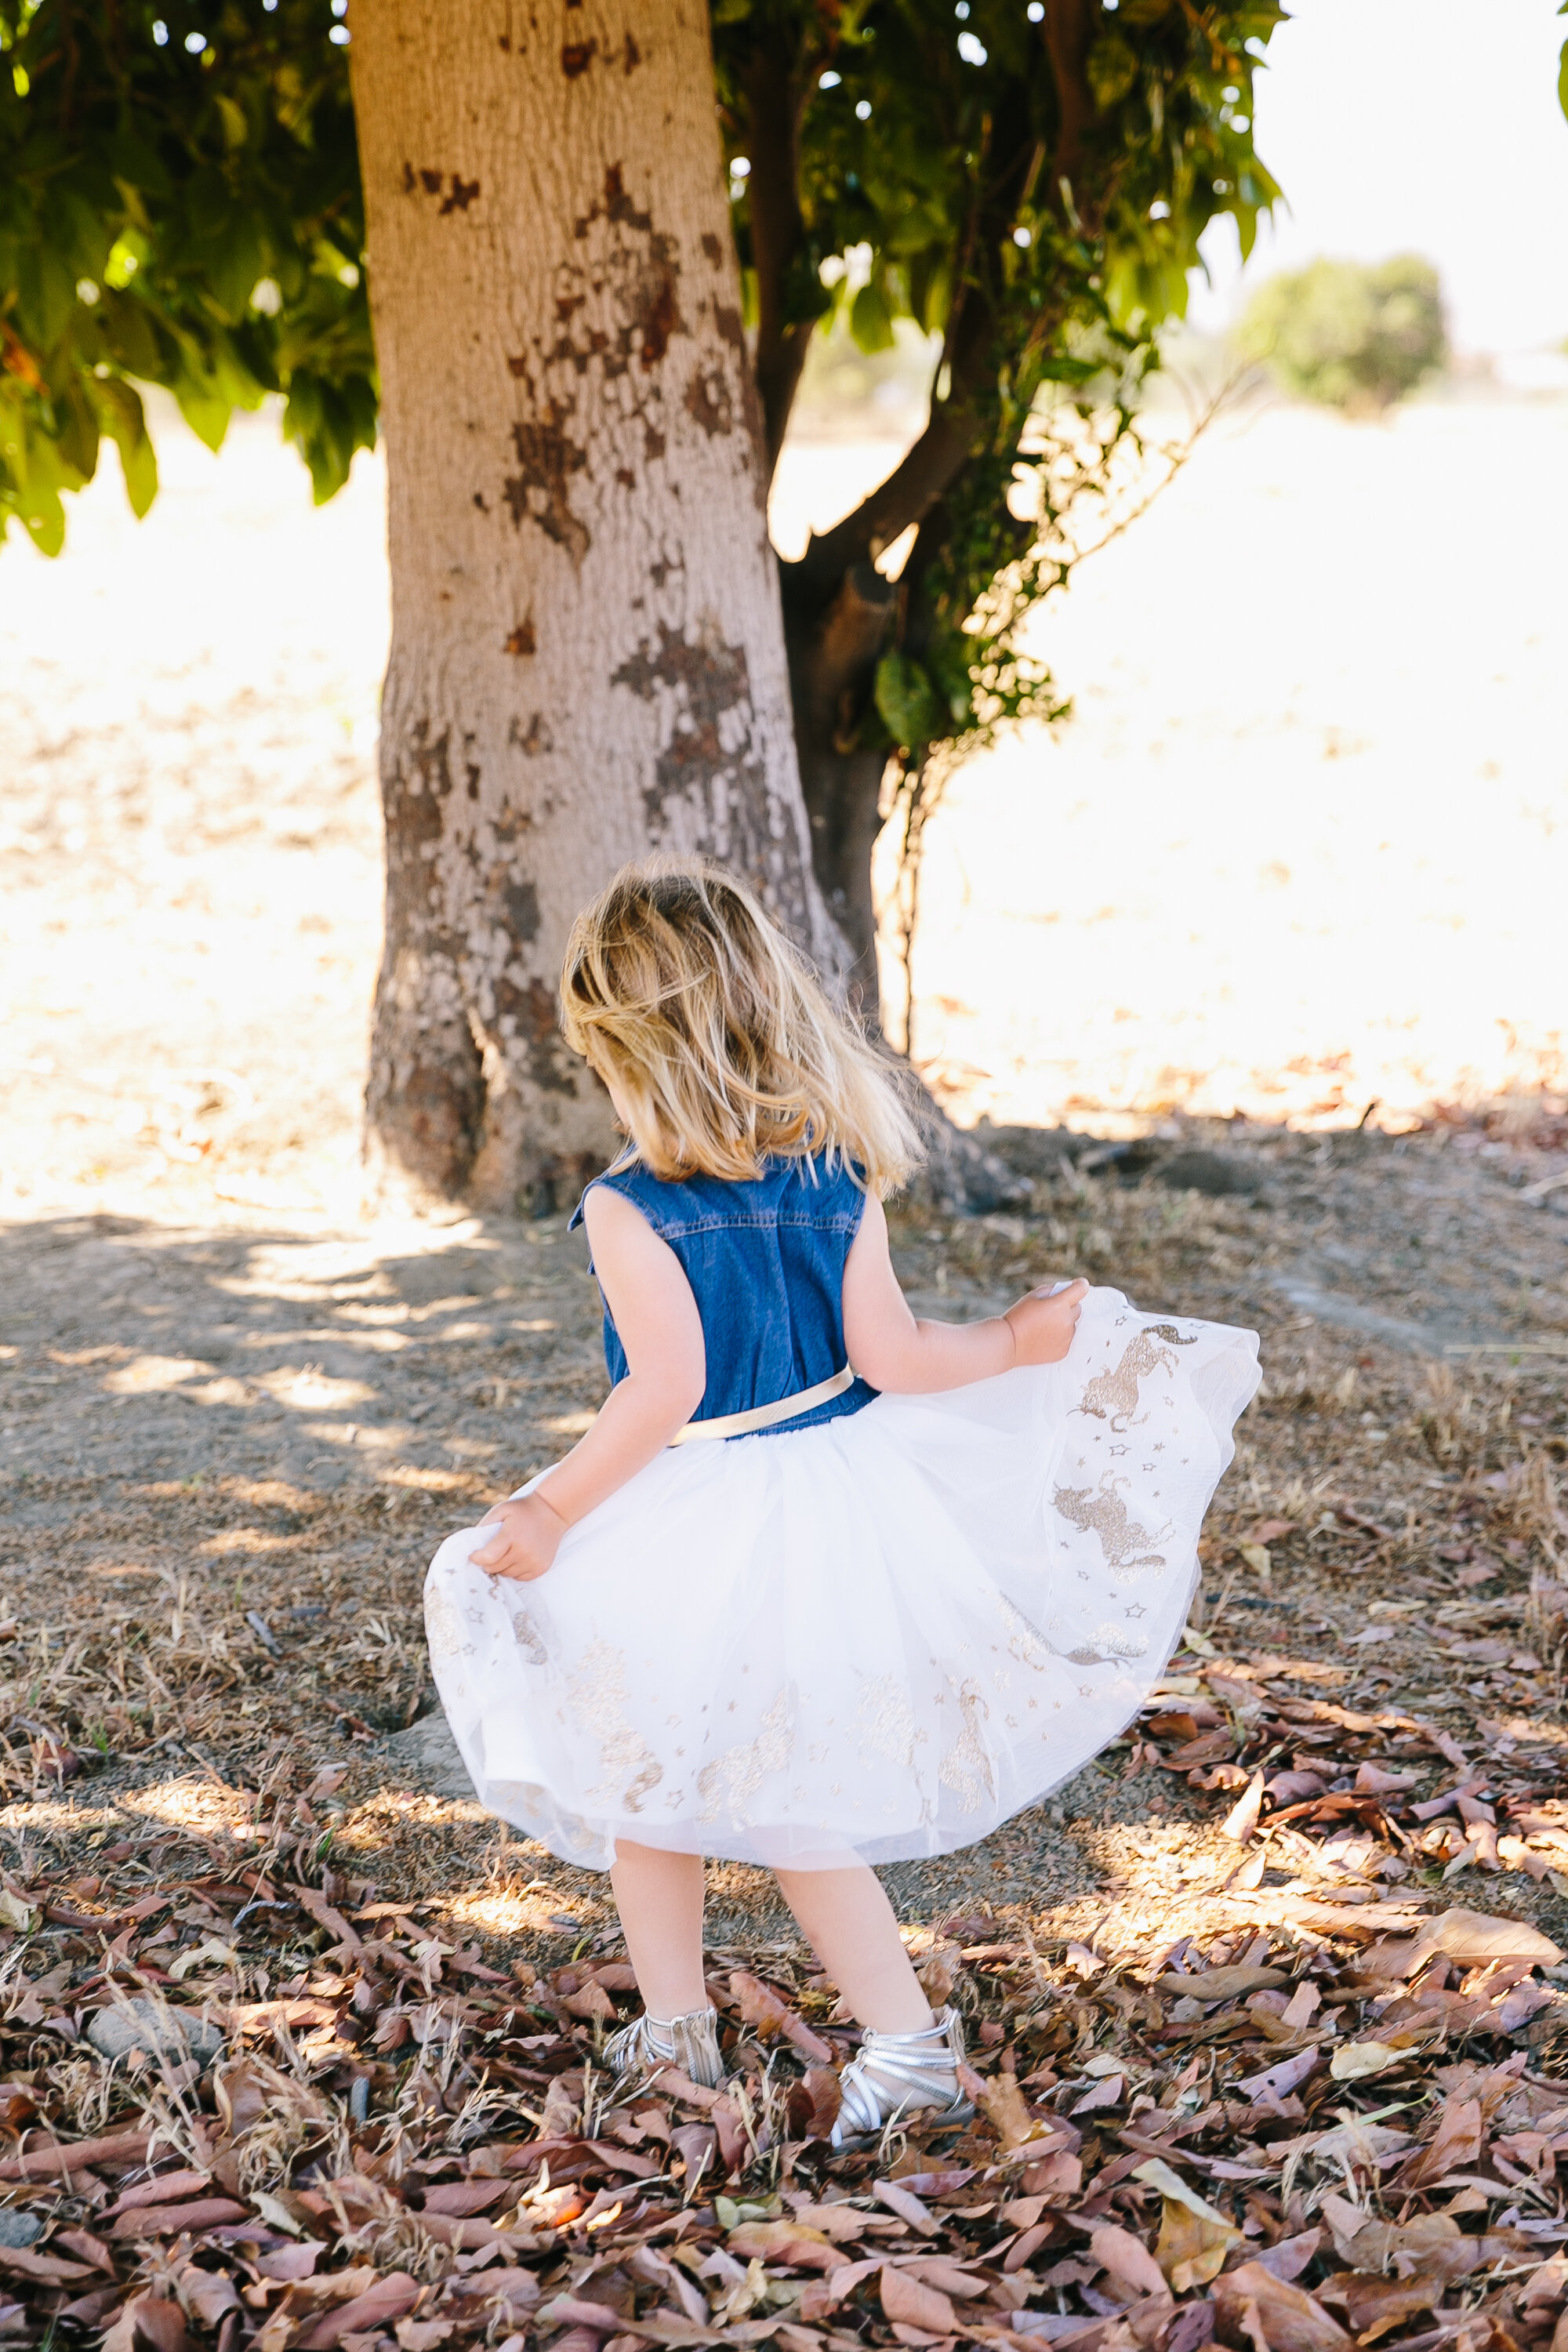 Los_Angeles_Family_Photography_Orange_County_Children_Babies_Field_Farm_Outdoors_Morning_Session_California_Girls_Boys_Kids_Photography-1152.jpg